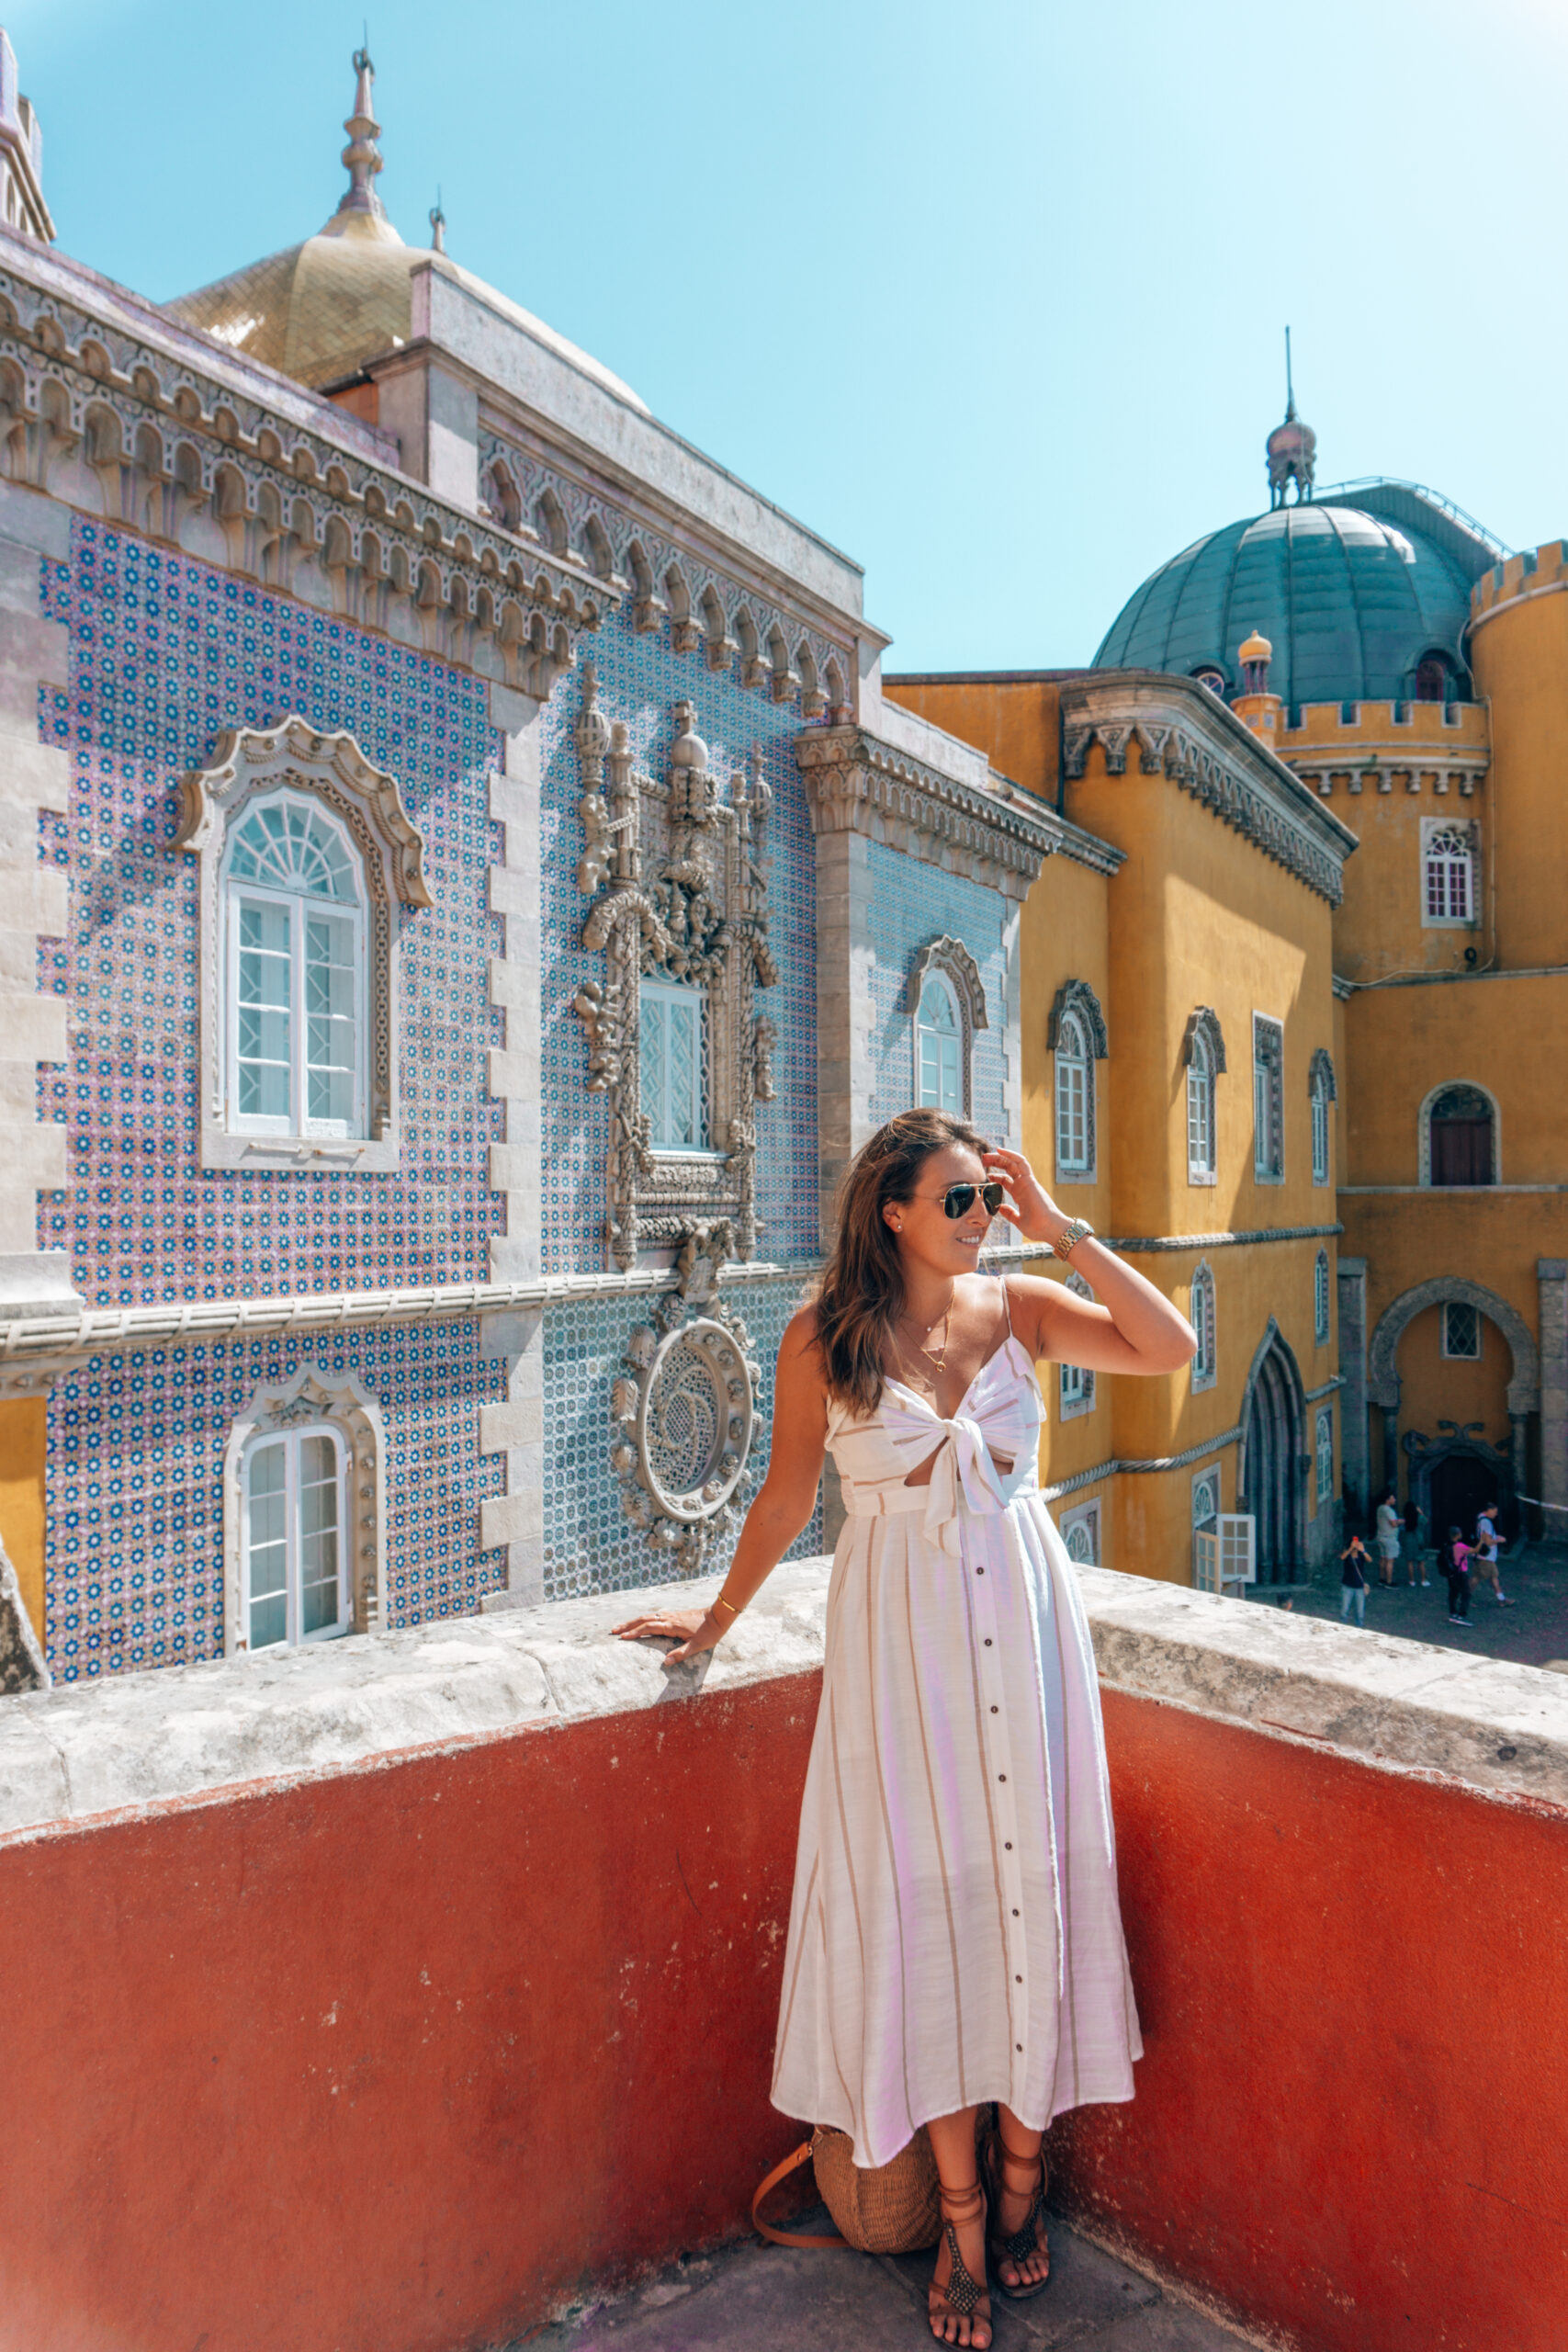 A girl in a white dress stands in front of the colourful Pena Palace in Sintra, a must see during your 3 days in Lisbon Itinerary 